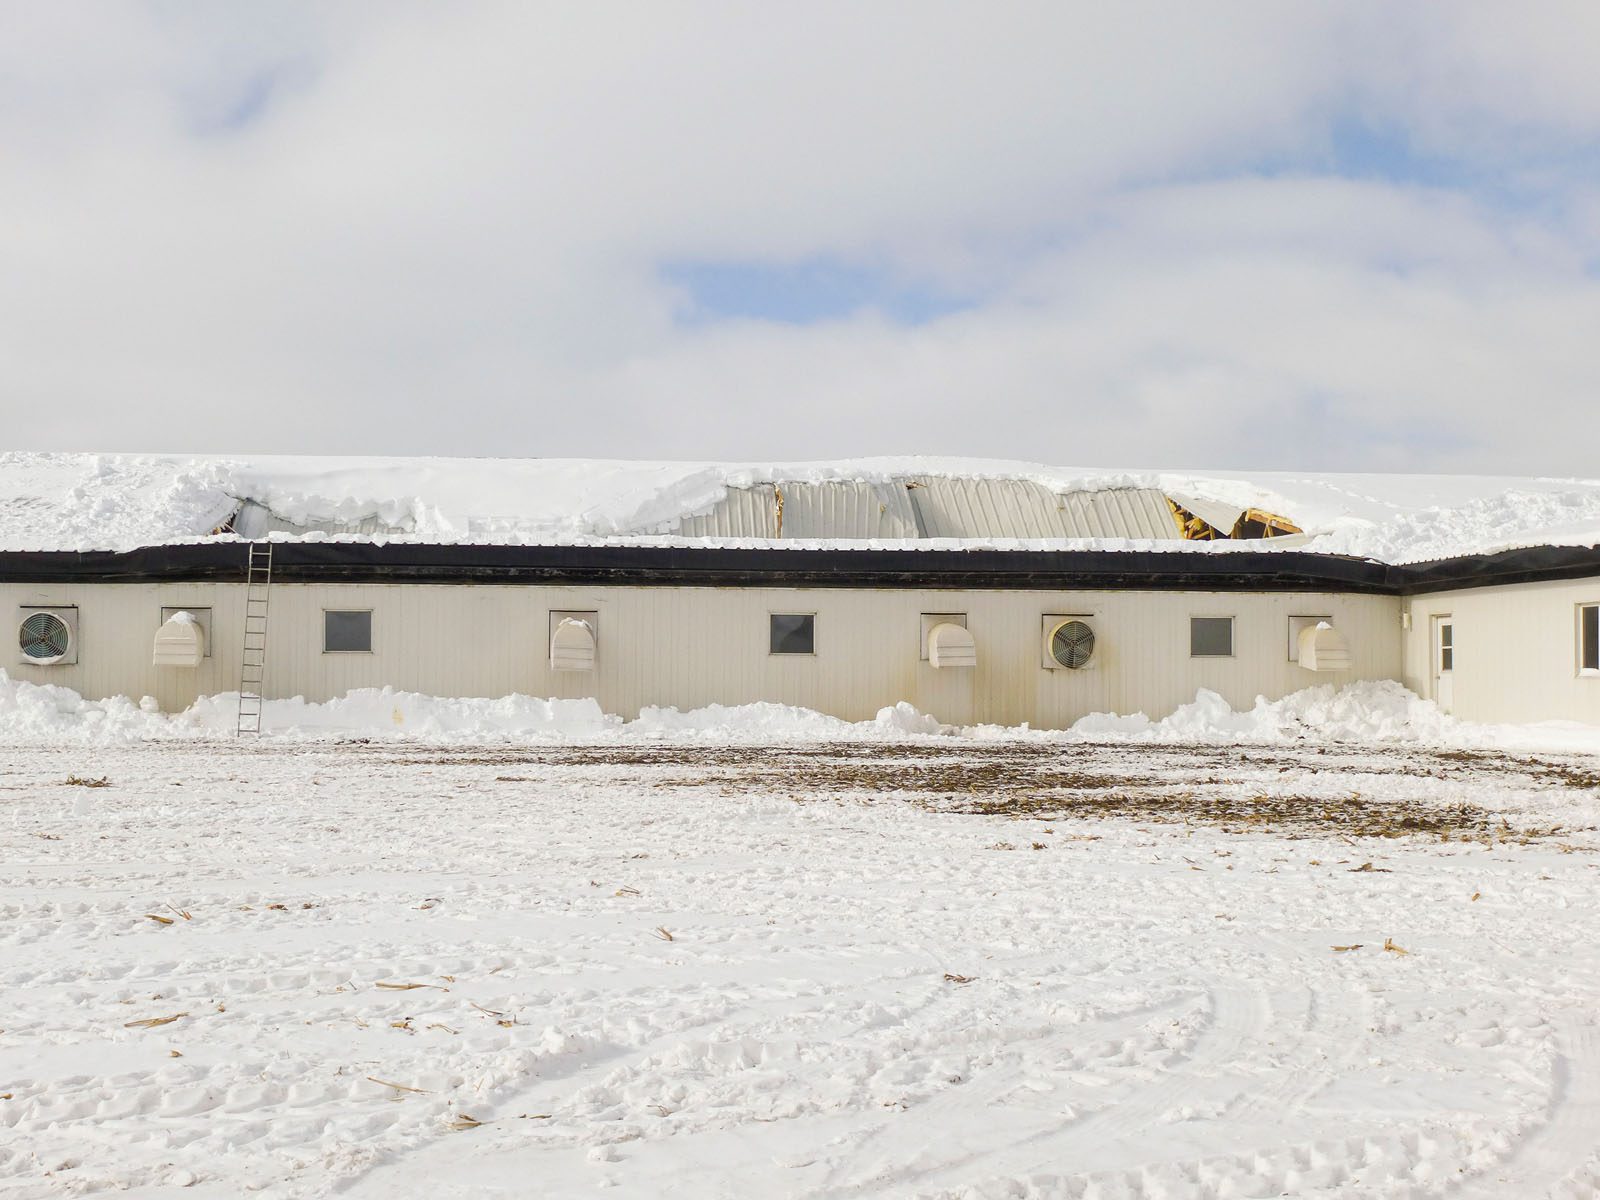 Collapsed roof of Agricultural Building due to Snow